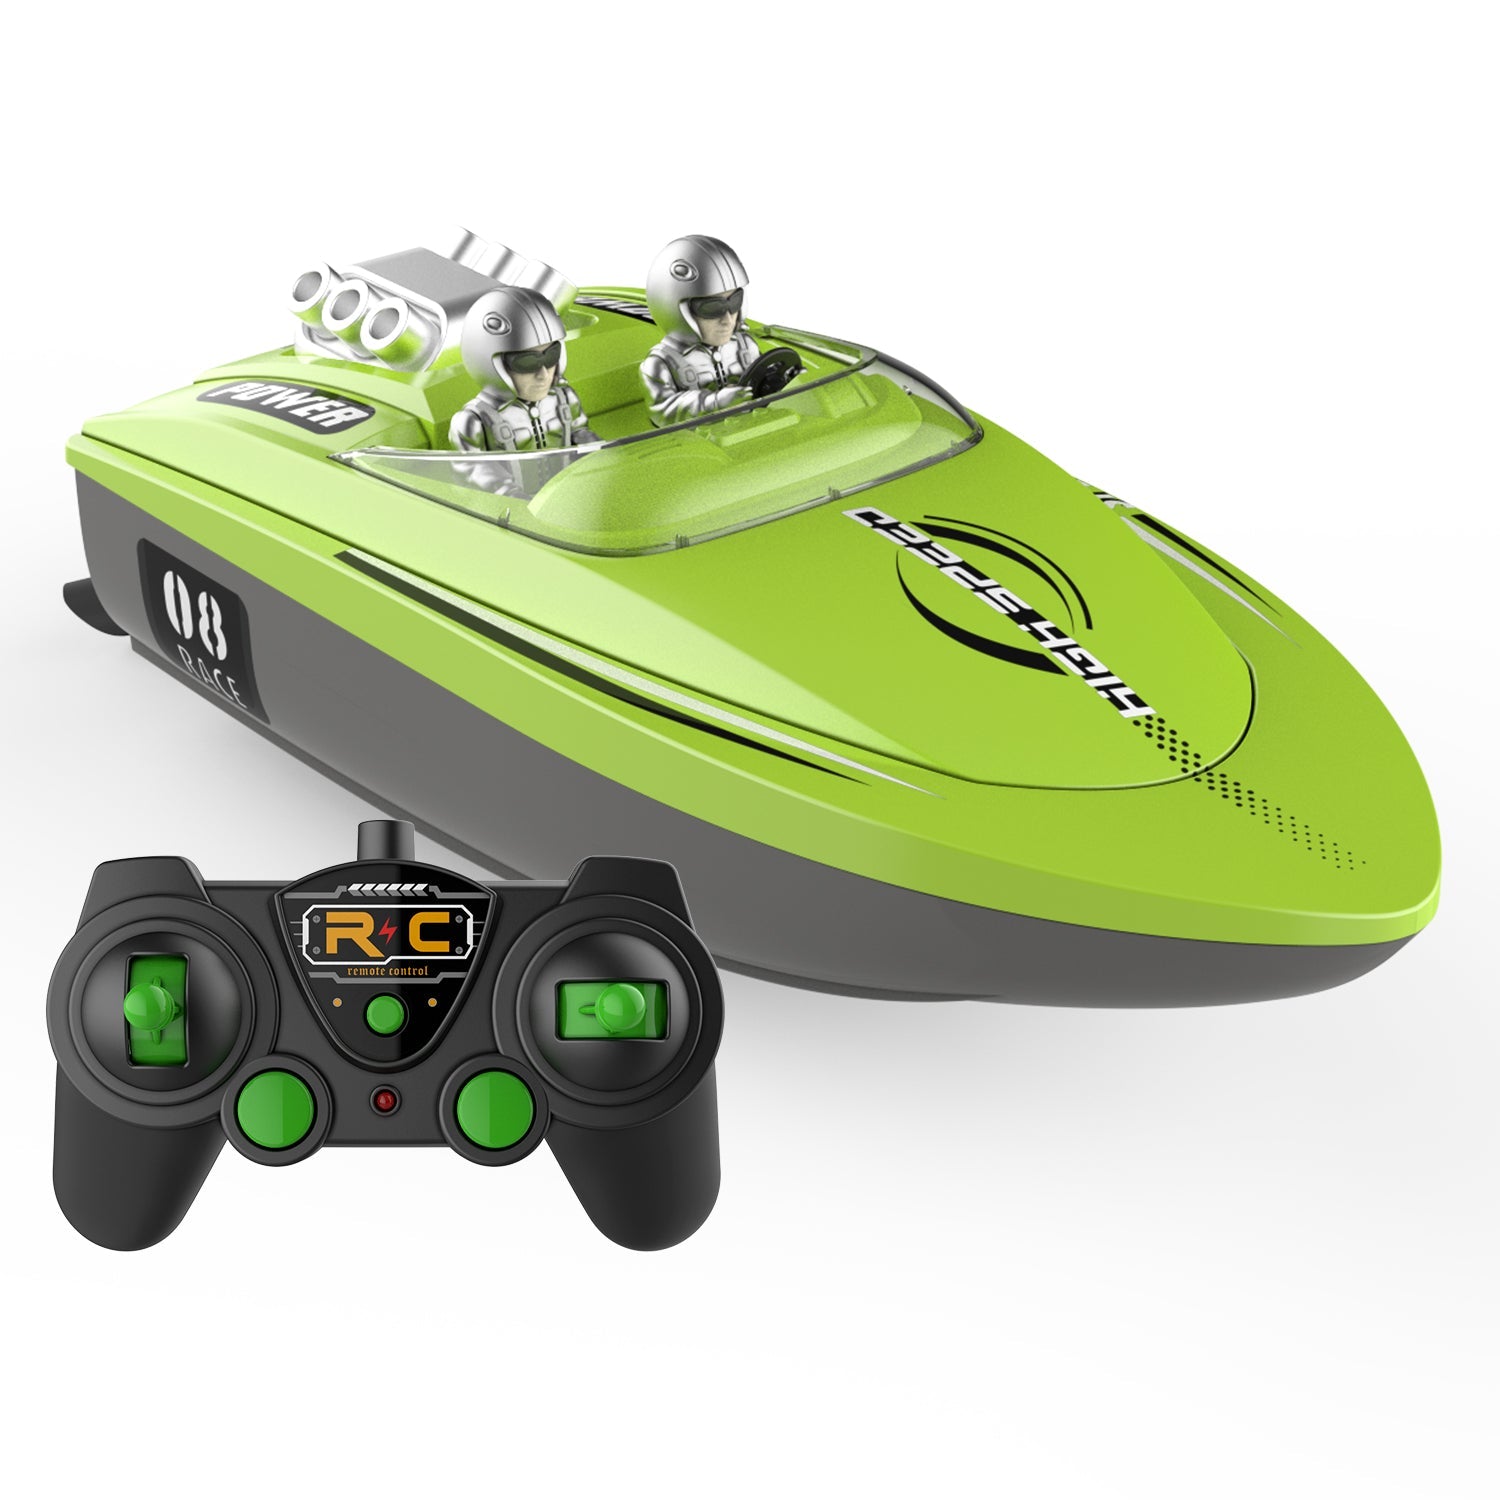 MYM Rechargeable Battery High Speed 20KM/H Wireless Racing Boat Toys 2.4GHz Pools Lakes Water Fast RC Boats for Kids Adults Gift | Electrr Inc